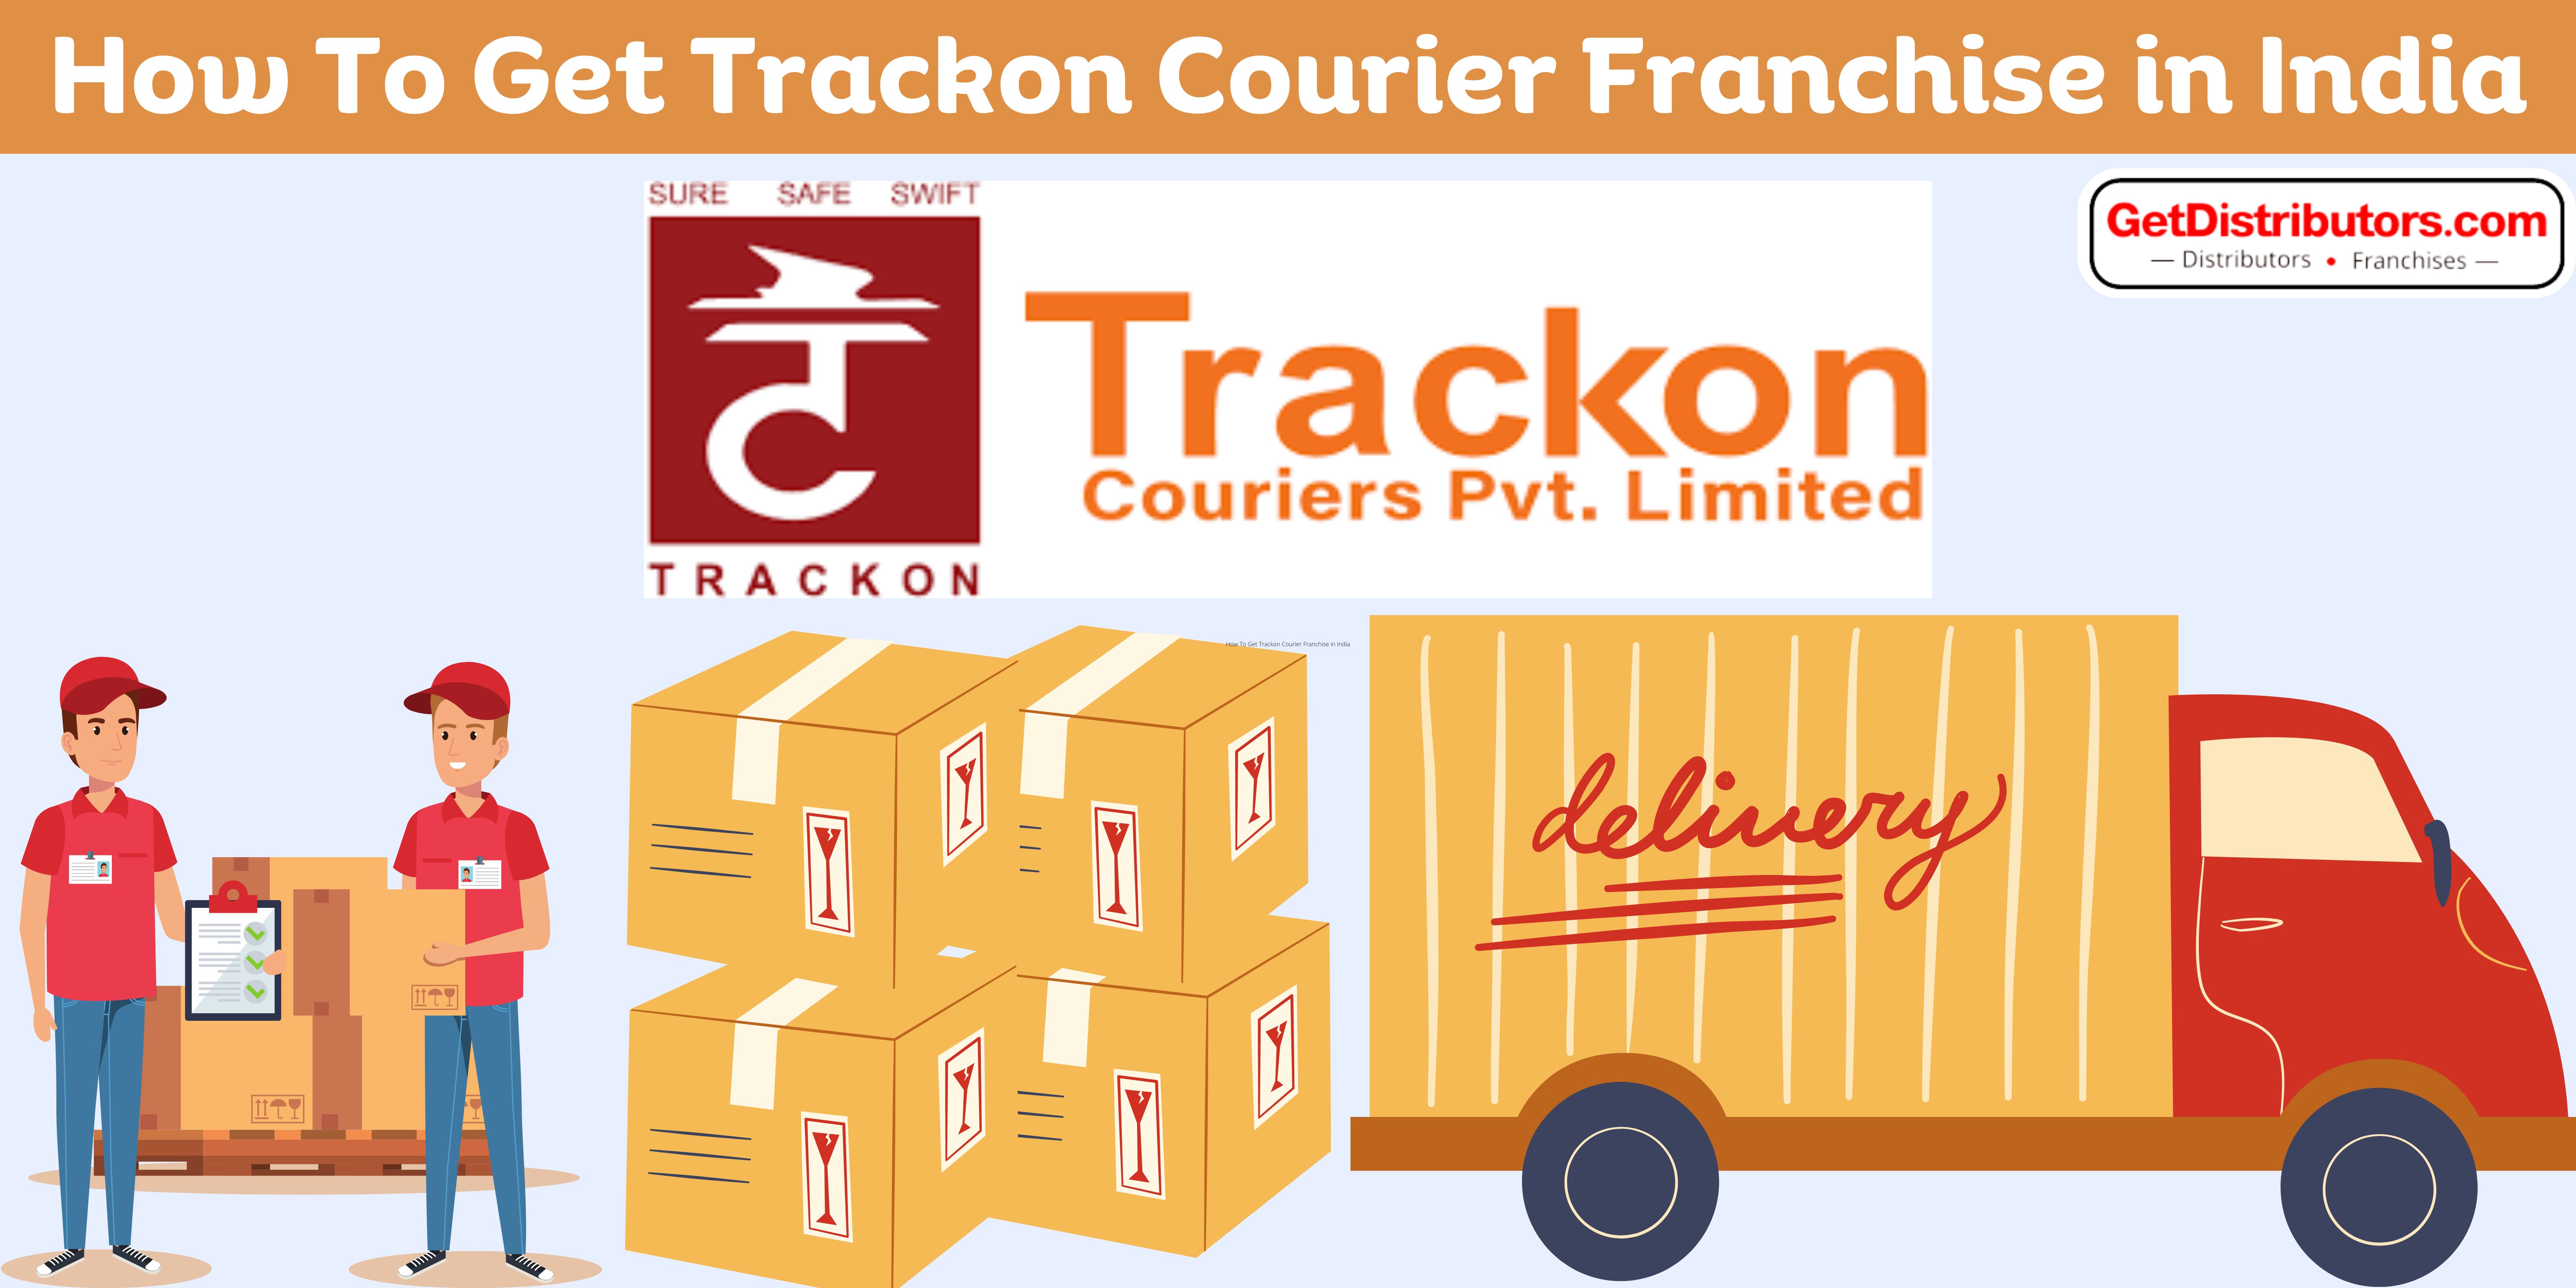 How To Get Trackon Courier Franchise In India